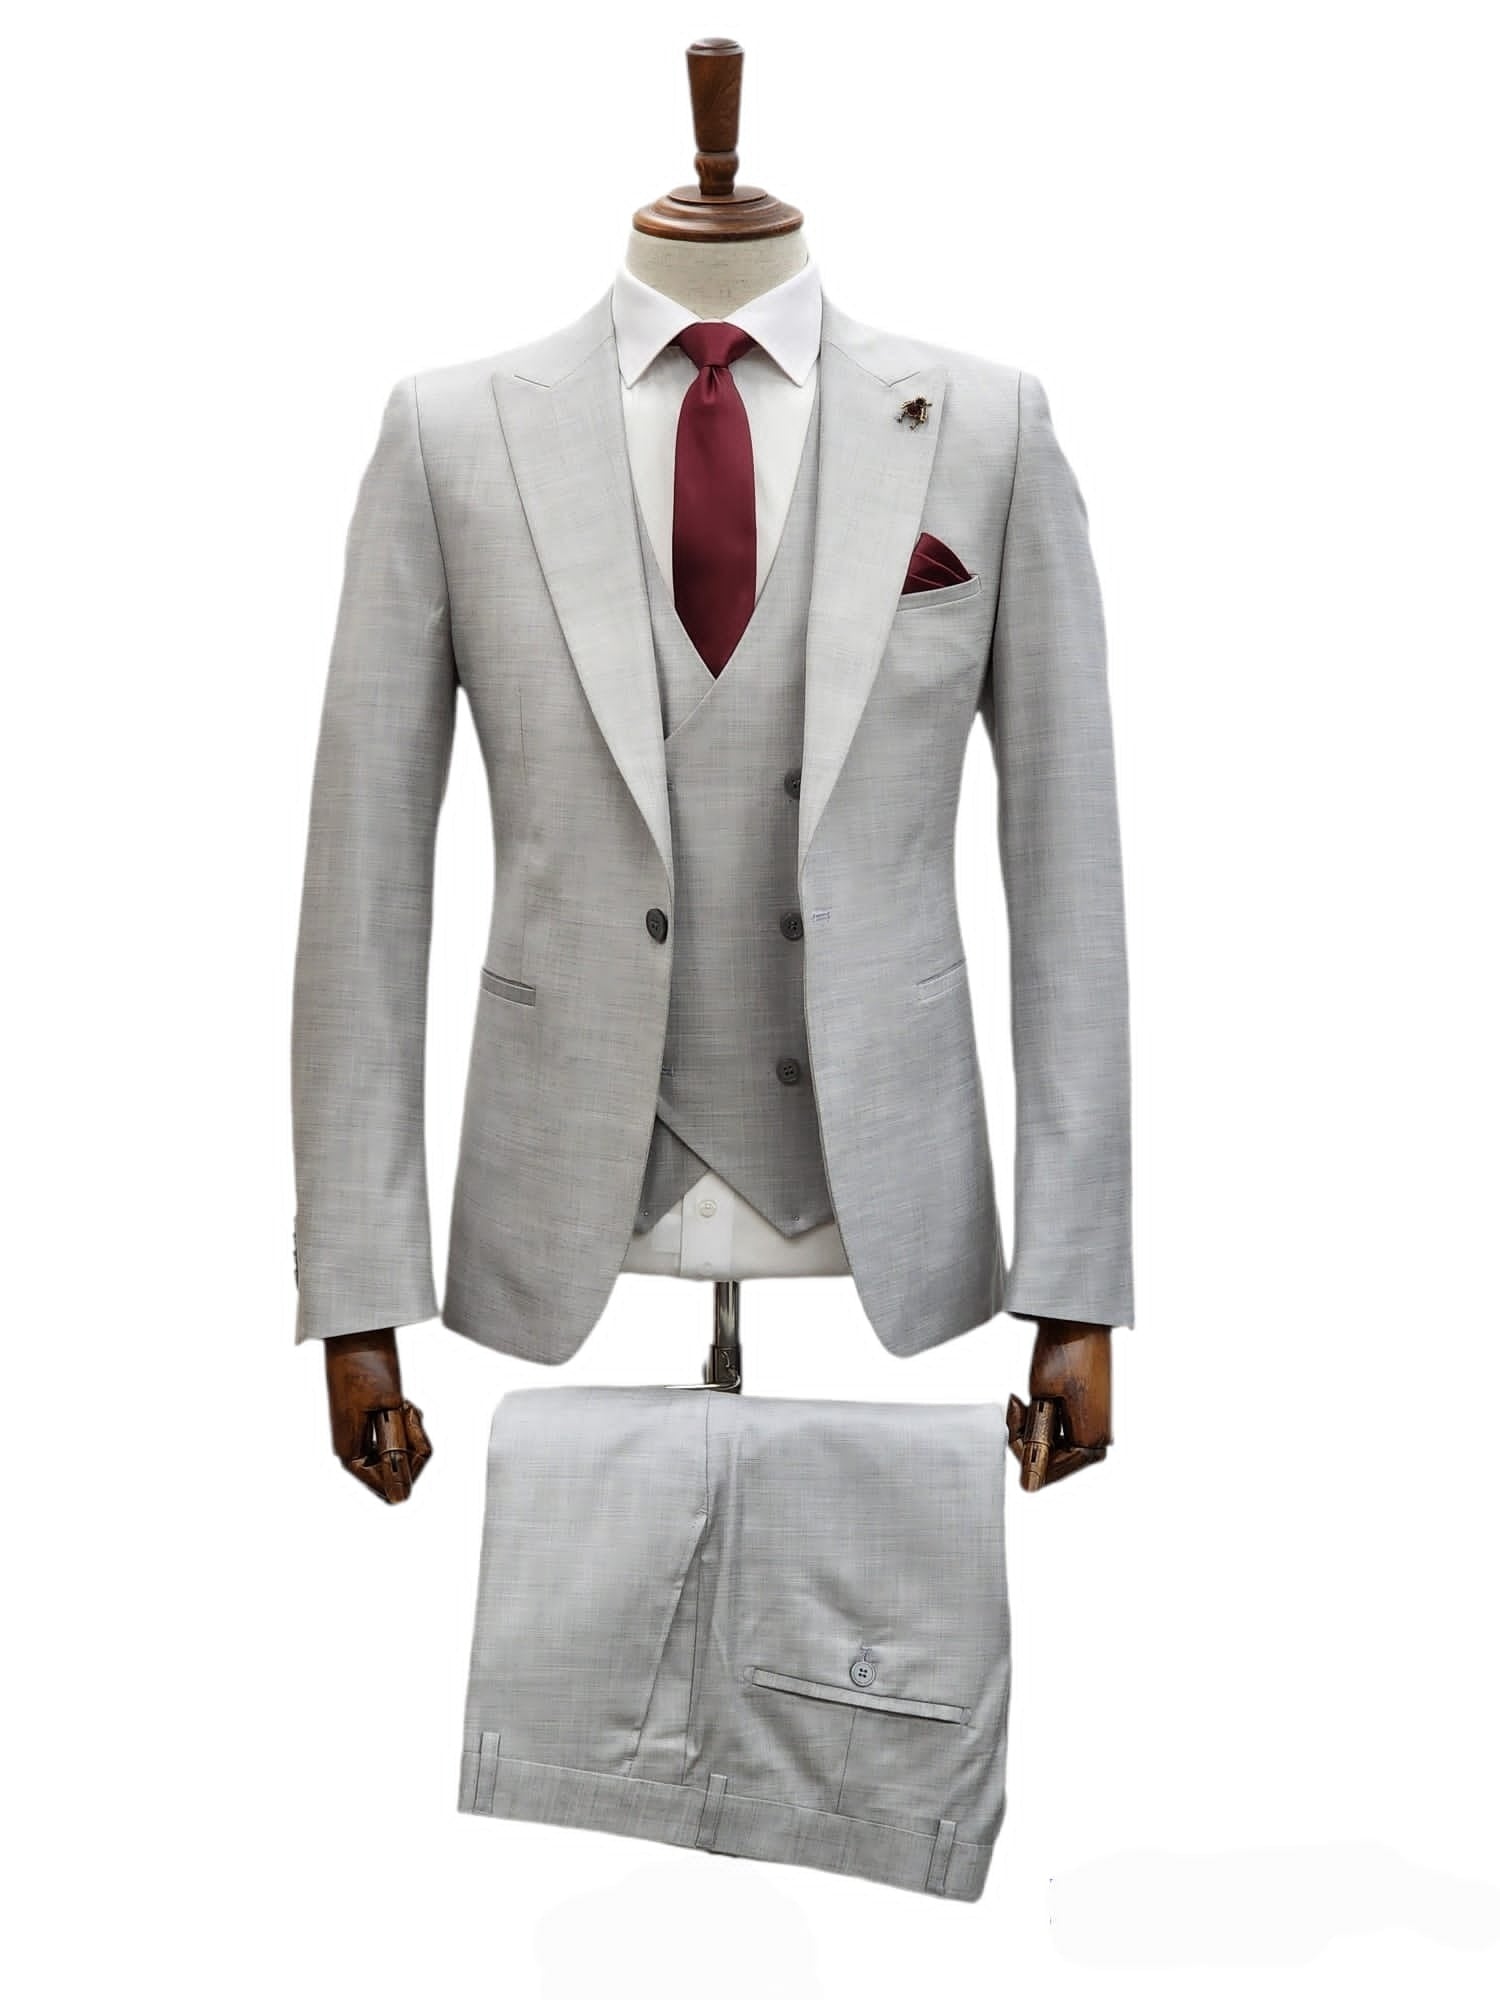 Giovanni Testi Suits With Double Breasted Vest - 3 Pieces  Peak Lapel  in Gray